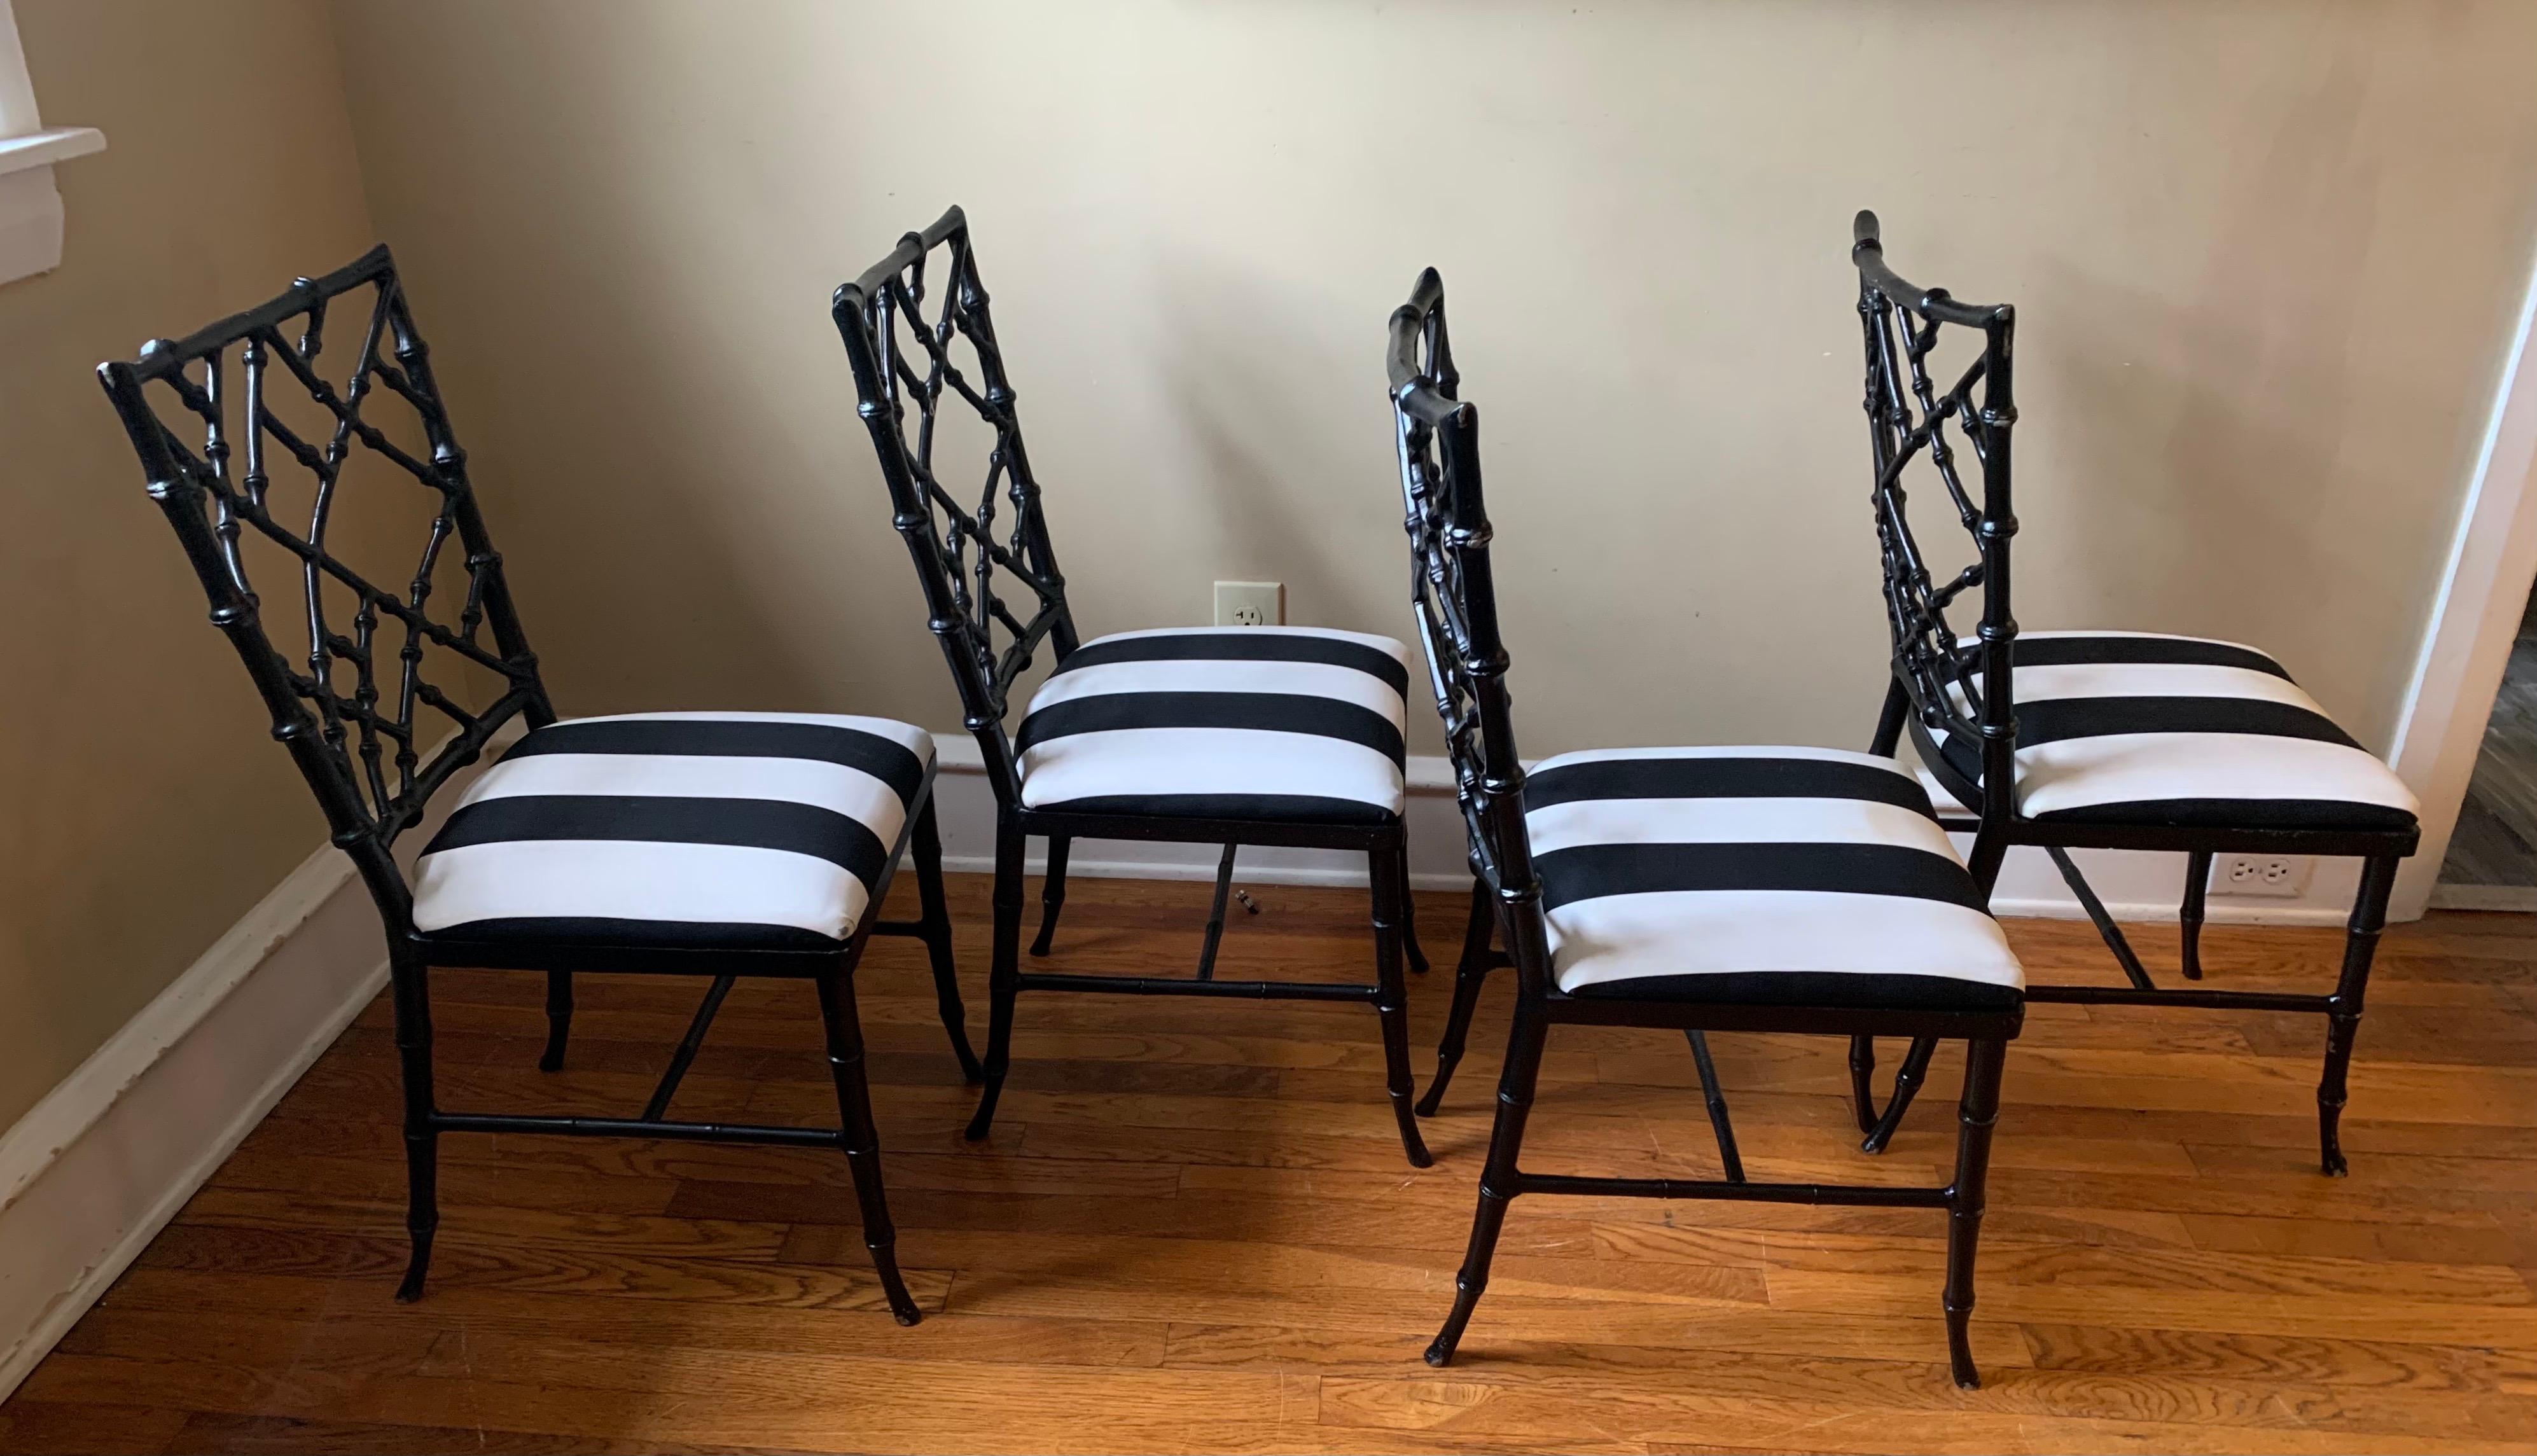 20th Century Hollywood Regency Faux-Bamboo Cast Metal Chairs by Phyllis Morris, Set of 4